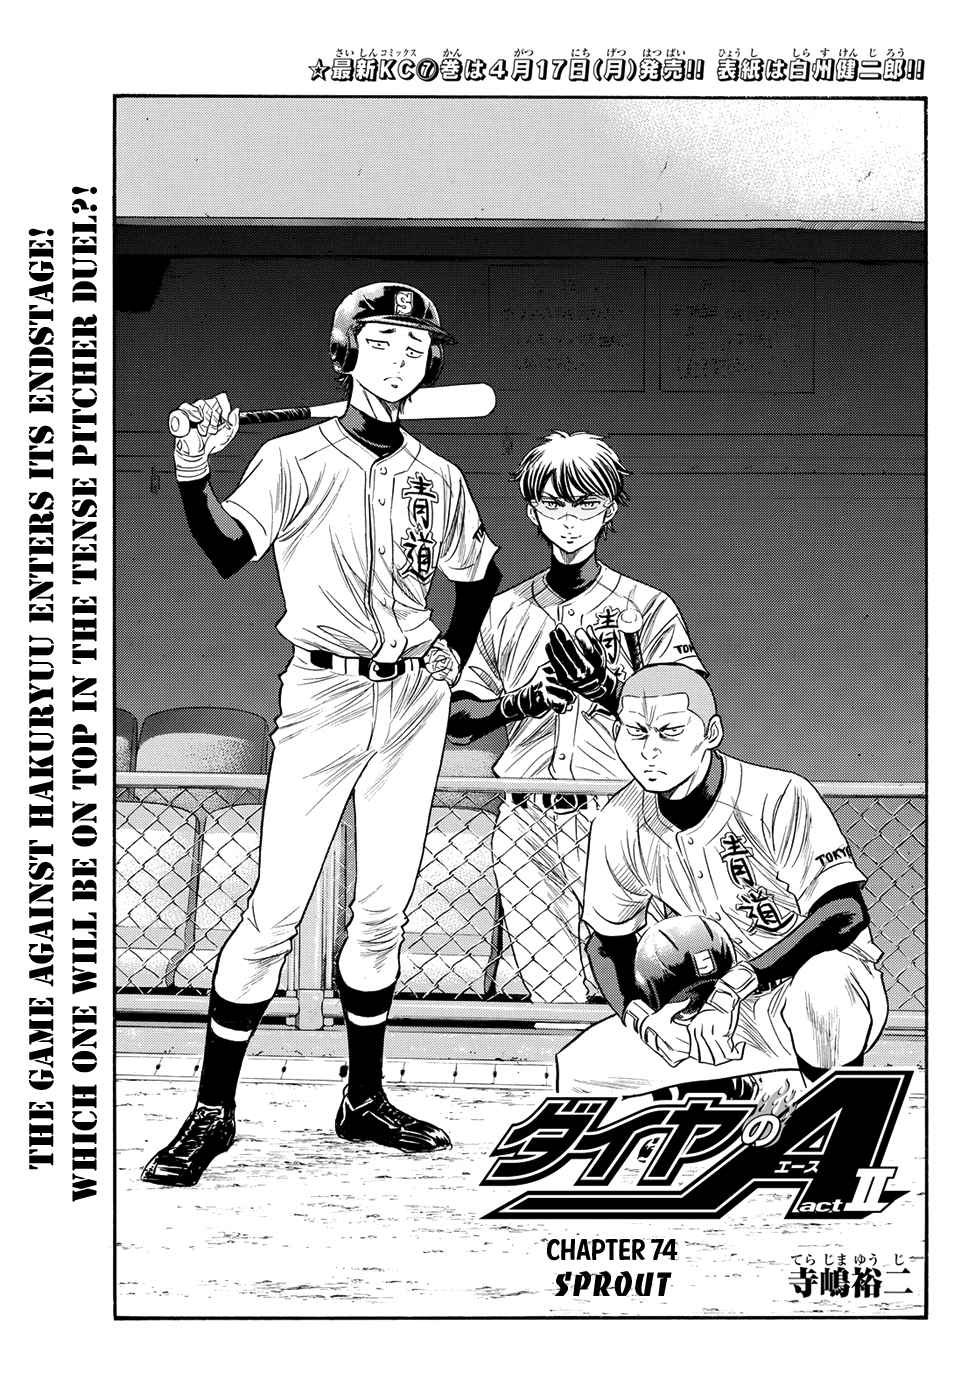 Diamond no Ace Act II Vol. 8 Ch. 74 Sprout